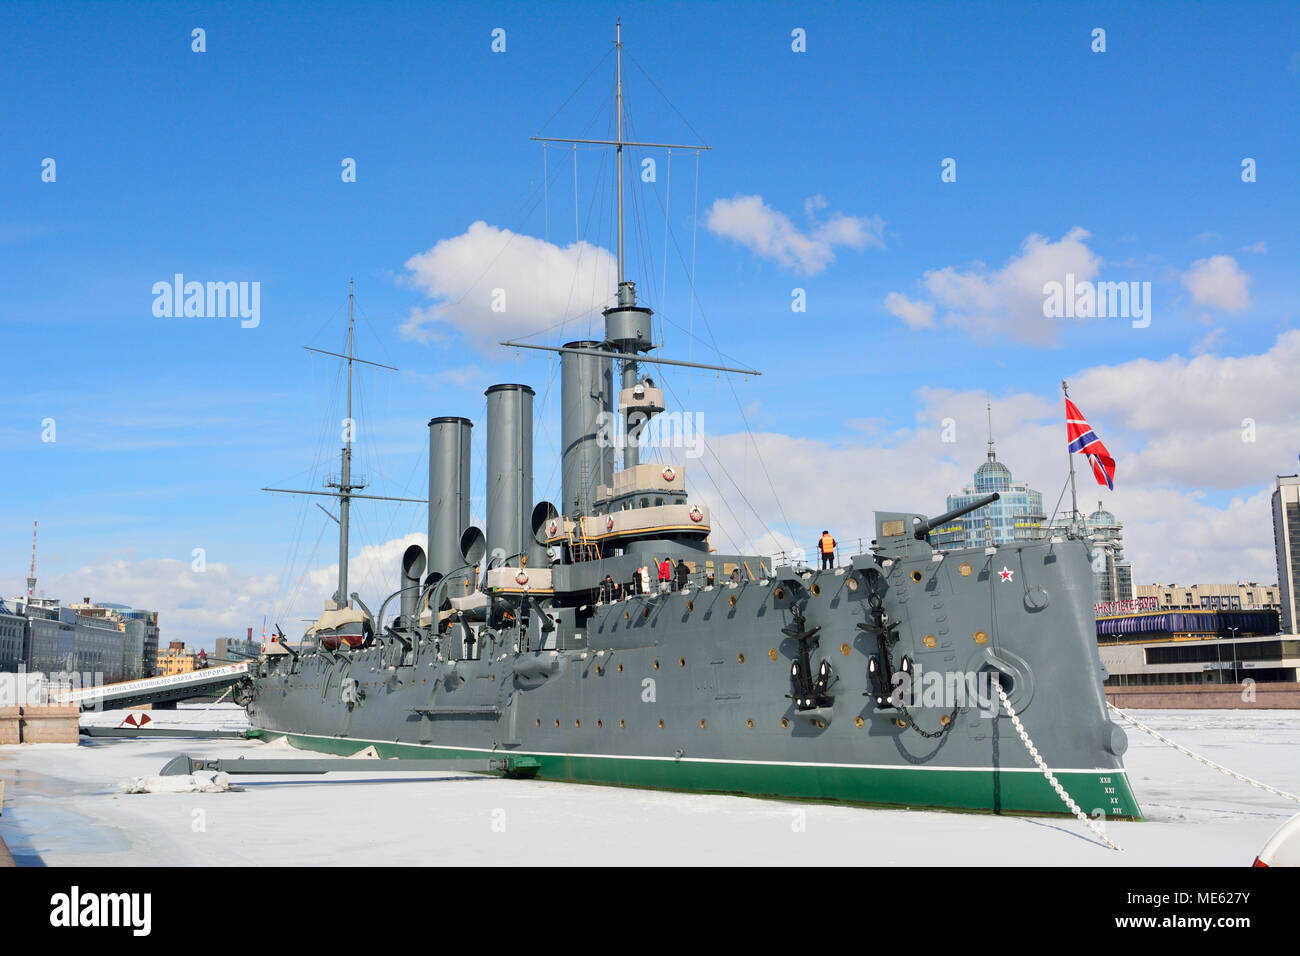 St Petersburg, Russia - March 27, 2018. Russian cruiser Aurora, dating from 1900, in St Petersburg, with people. Stock Photo